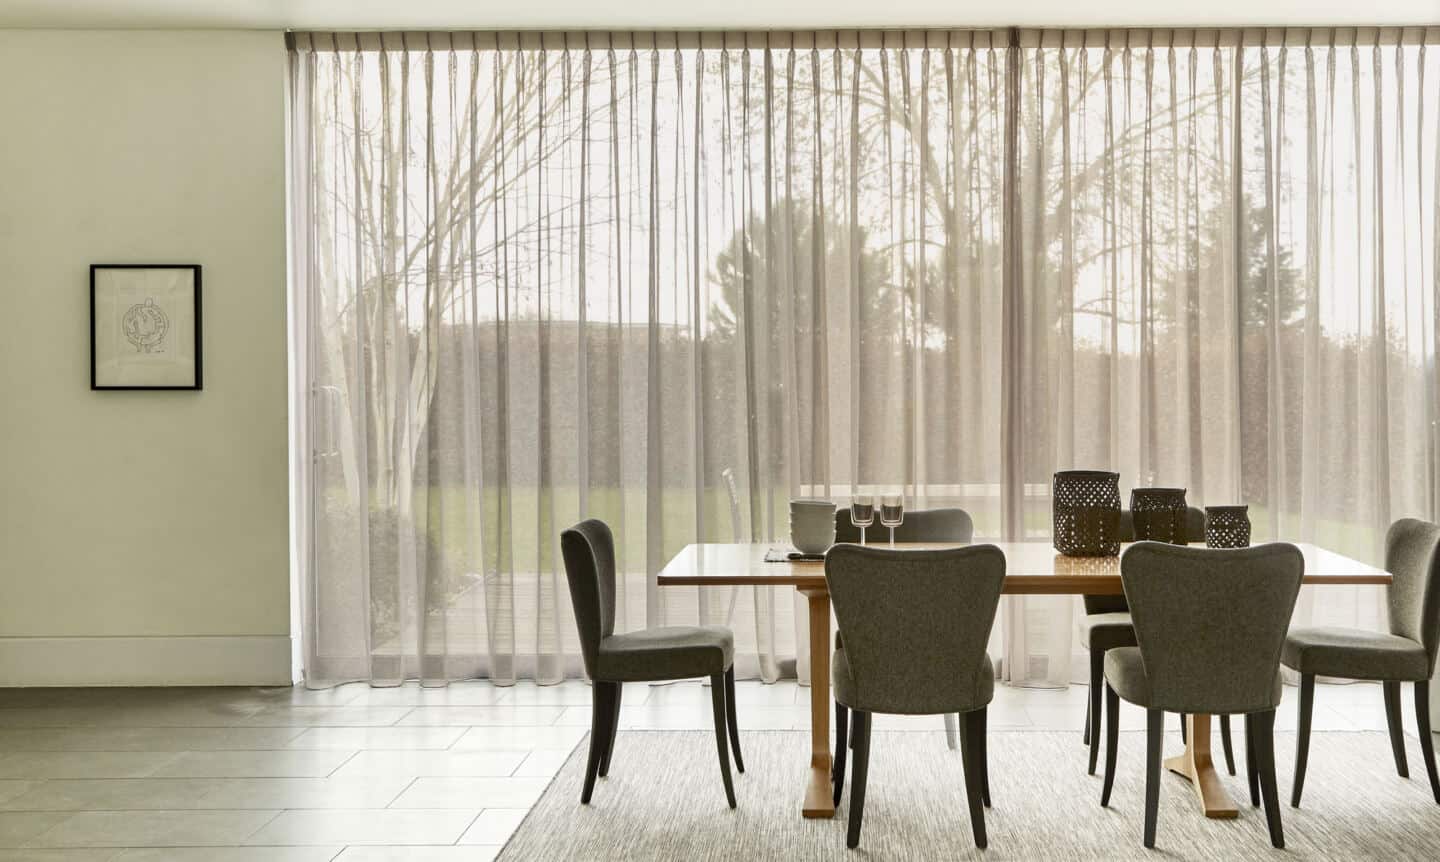 Linen voile curtains in a dining room allow more natural light at home